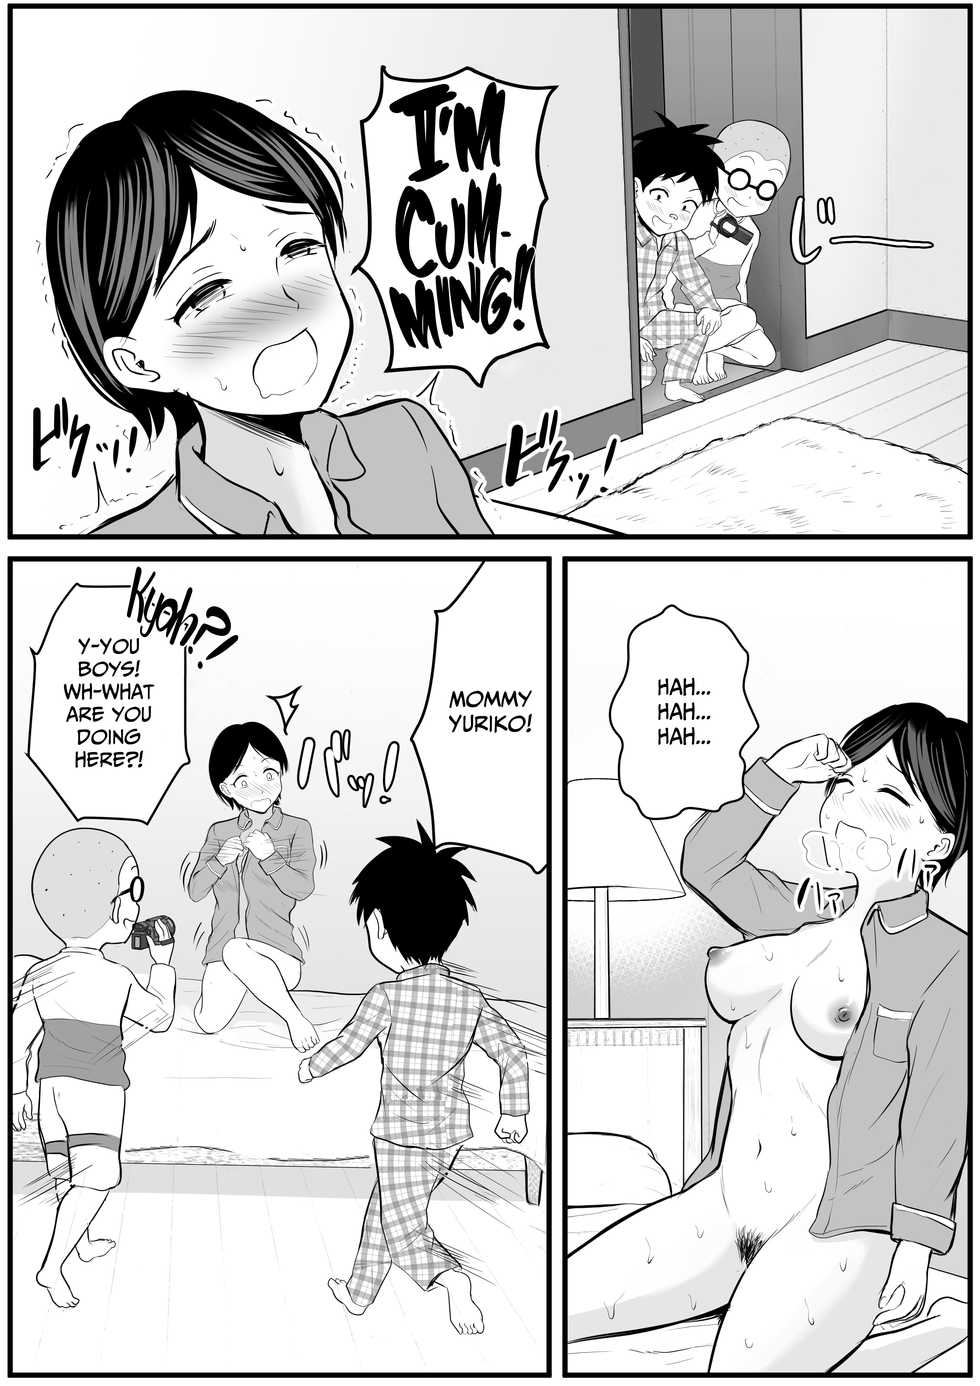 [Toshiue Onee-san Tengoku (Kaho Ren)] Doukyuusei no Mama o Hamedori Mission! | The Classmate's Mommy's Sex Tape Filming Mission [English] [CulturedCommissions] - Page 17